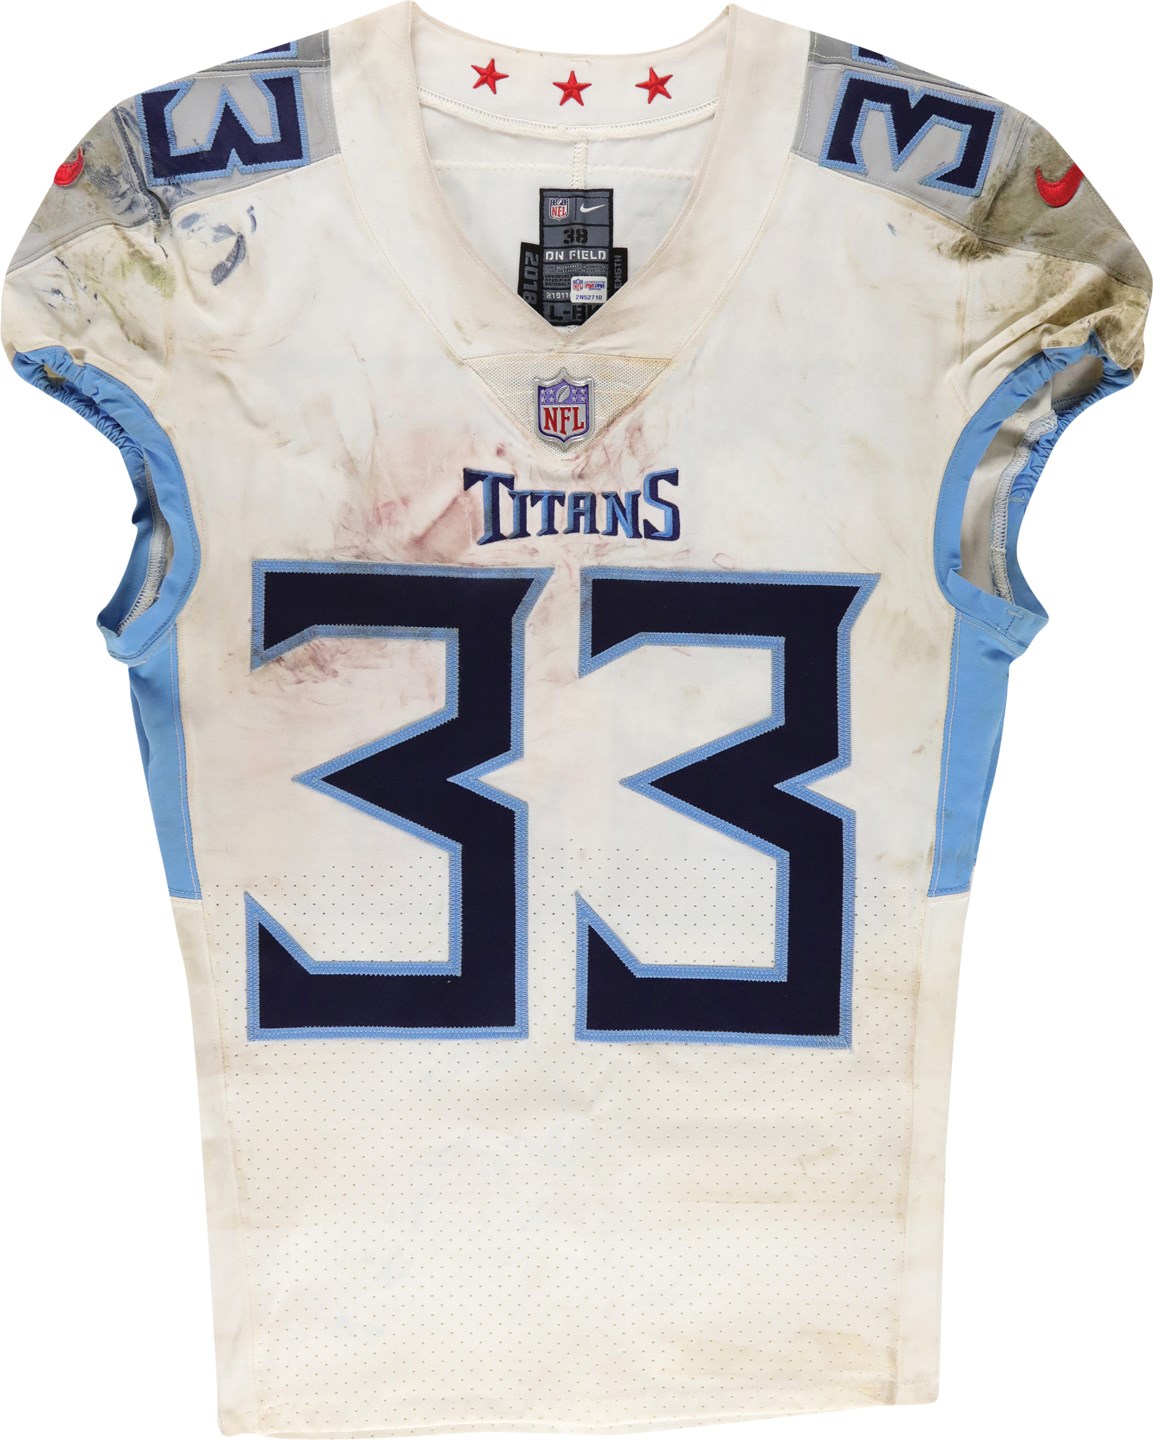 Football - 10/21/18 Dion Lewis Tennessee Titans in London Game Worn Unwashed Jersey - Season High Rushing Yards Game (Photo-Matched)